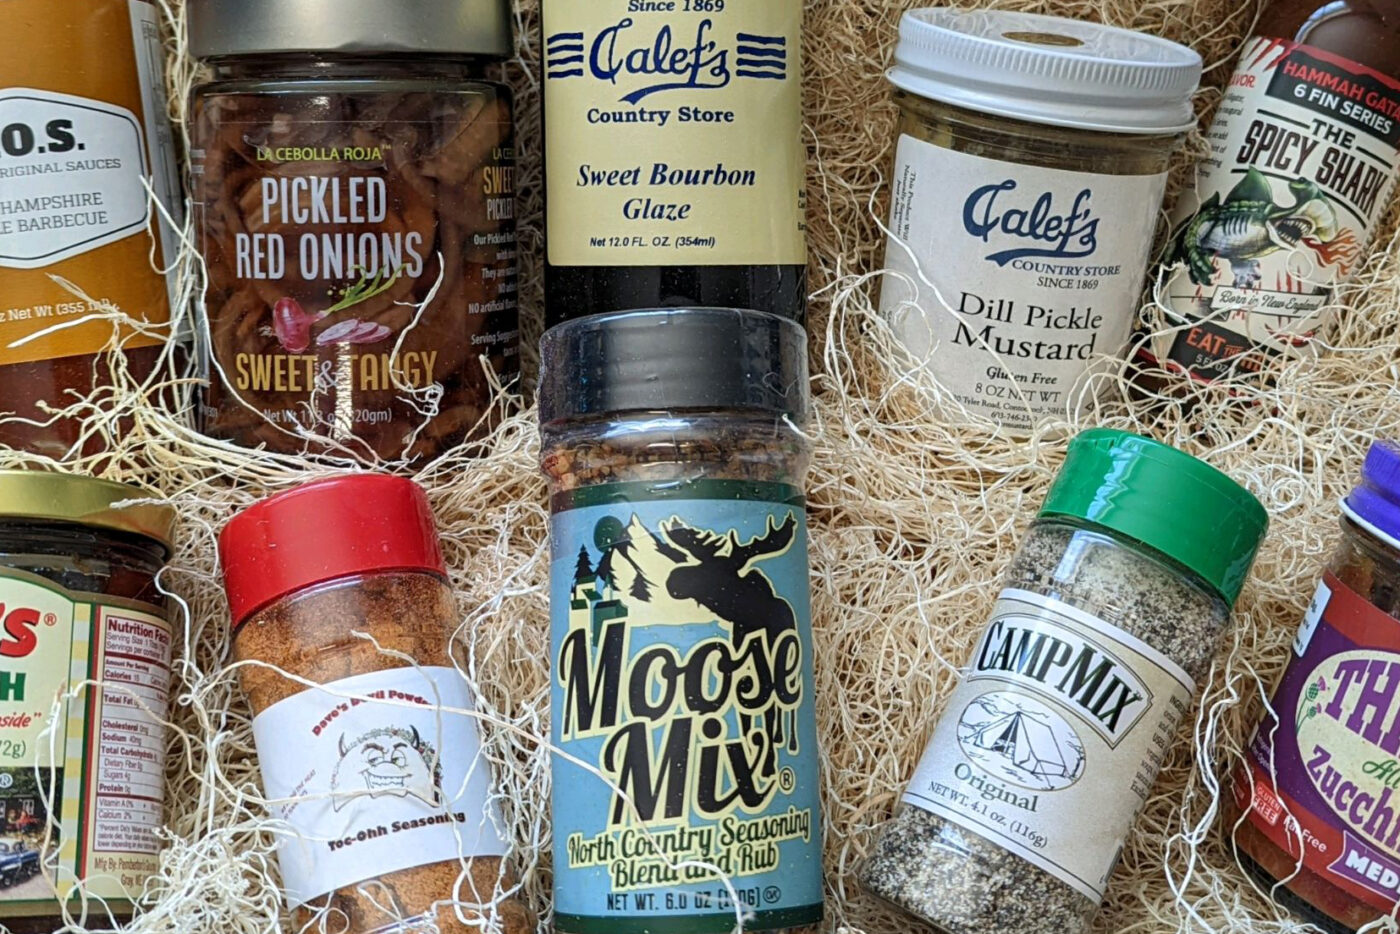 Calef's Condiment King gift box filled with bestselling condiments